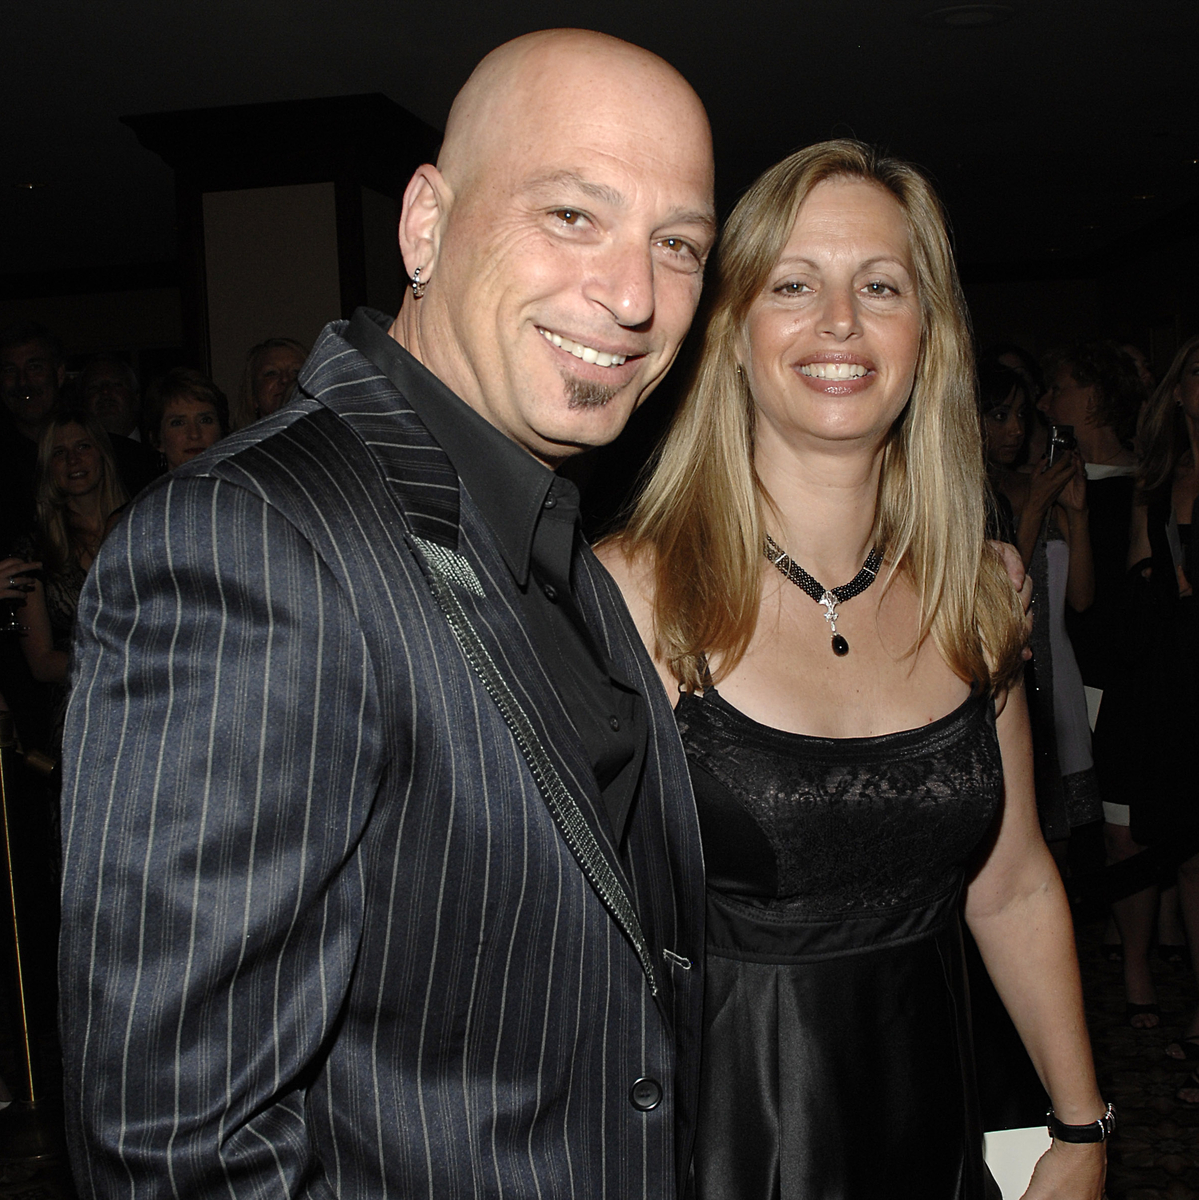 Howie Mandel's Wife Suffers Severe Injuries from Fall during Alcohol-Fueled Night in Las Vegas: A Warning on Alcohol Consumption